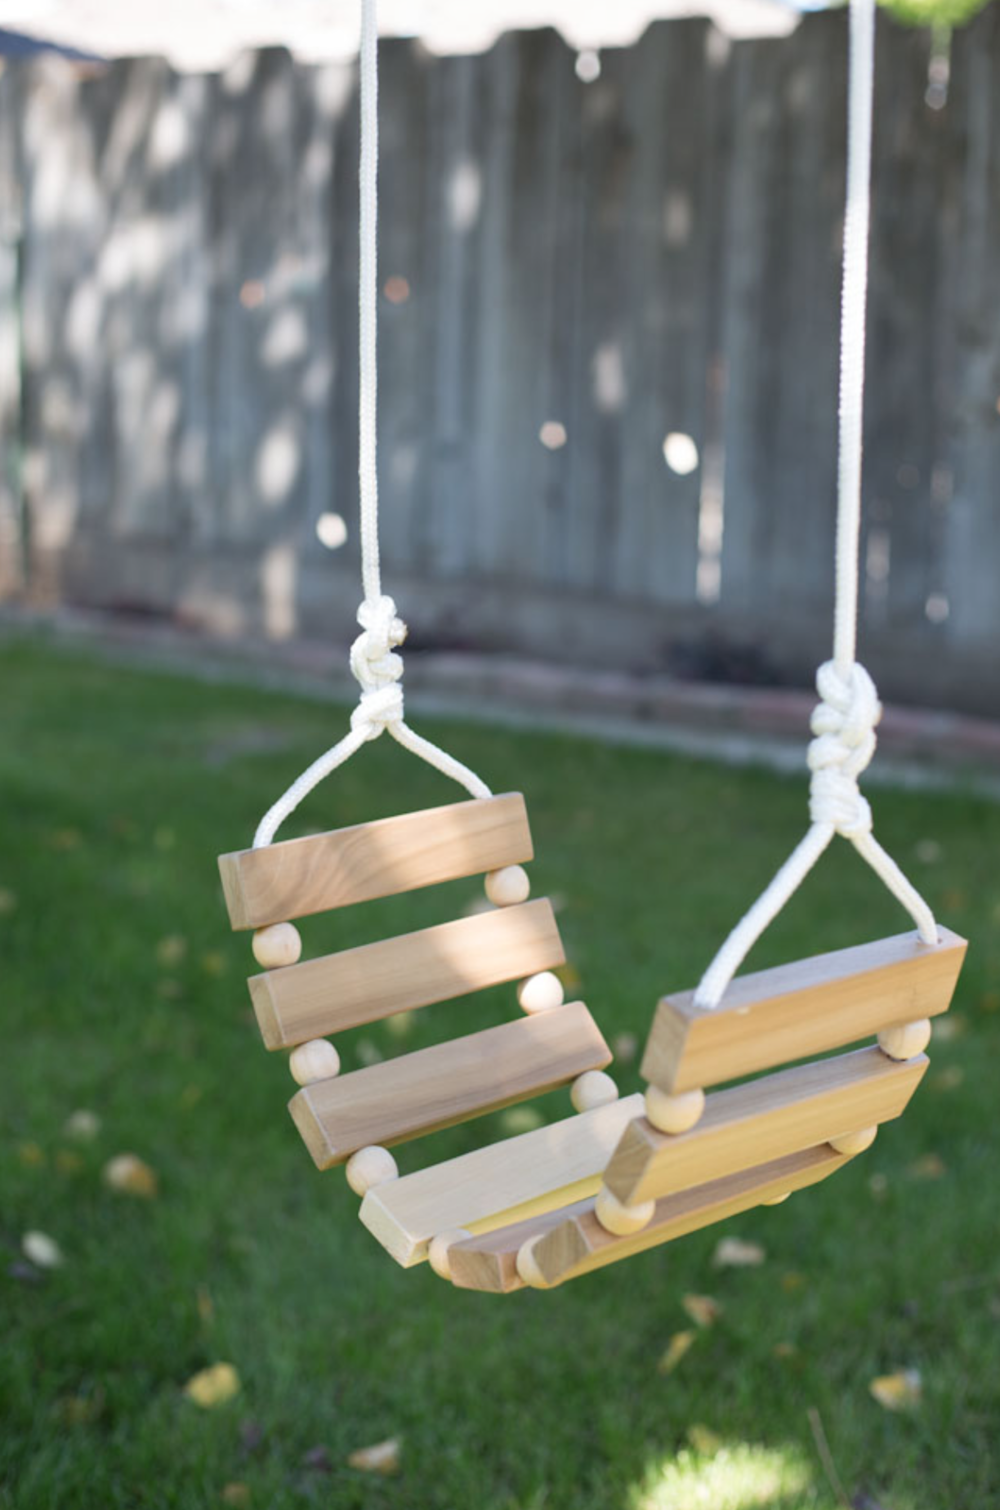 Wood slats are strung with fabric to create a tree swing over a lush lawn.